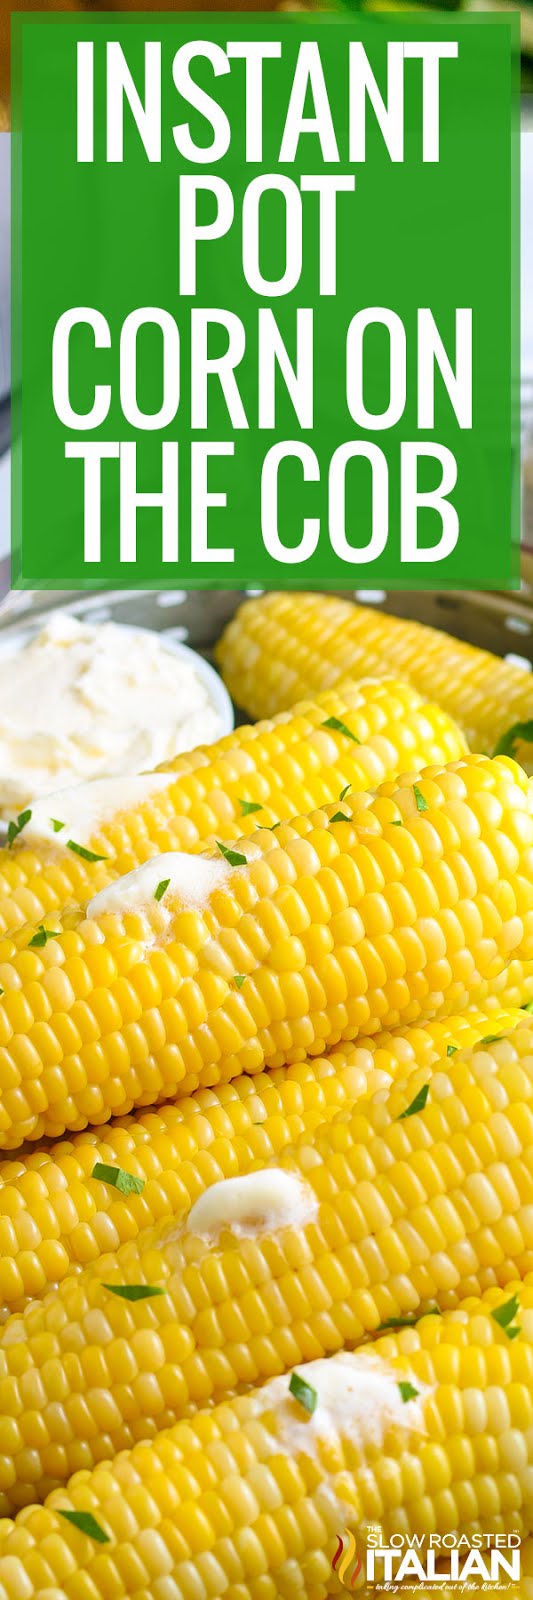 Titled photo (and shown) Instant Pot Corn on the Cob